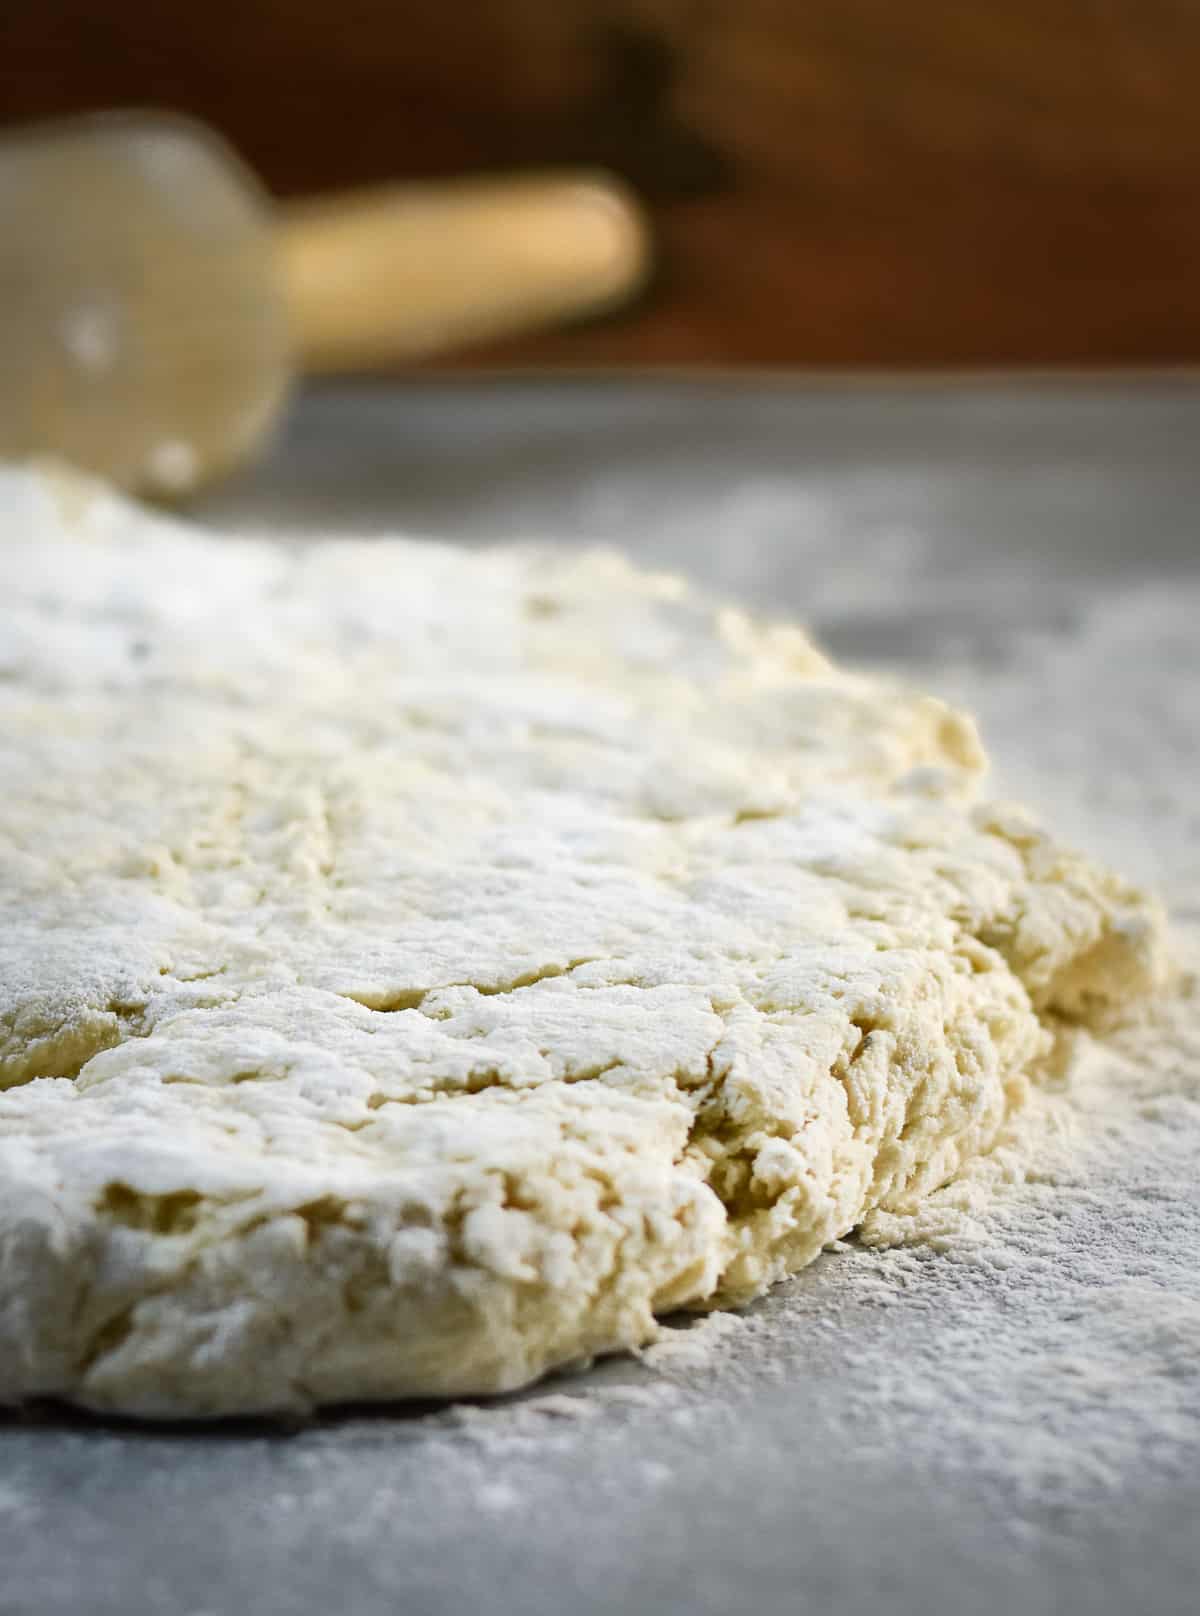 Biscuit dough rolled out on floured service.